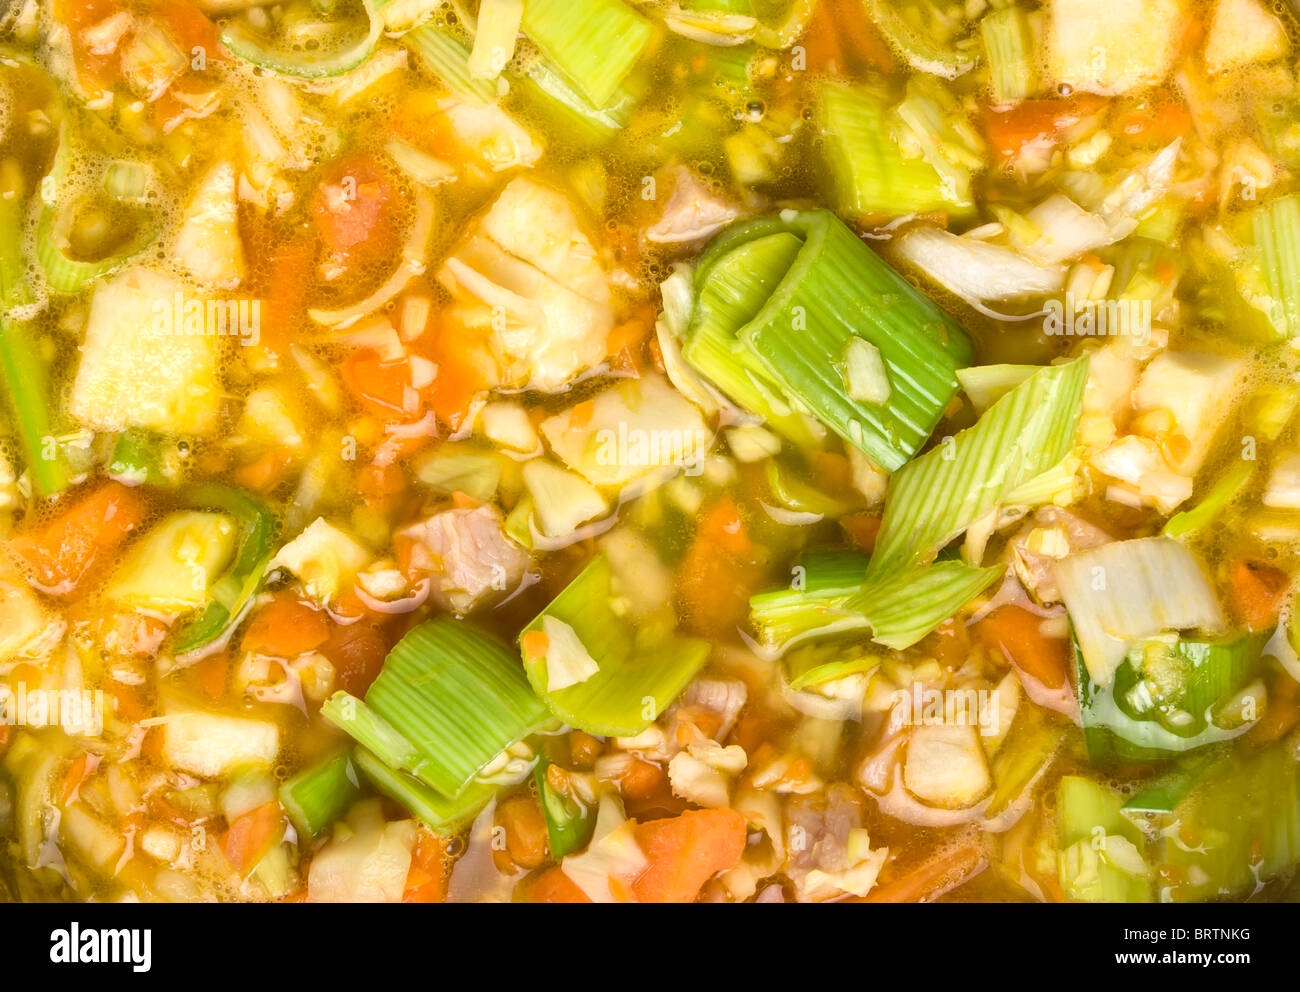 Vibrant Rustic vegetable and ham broth background or texture. Stock Photo